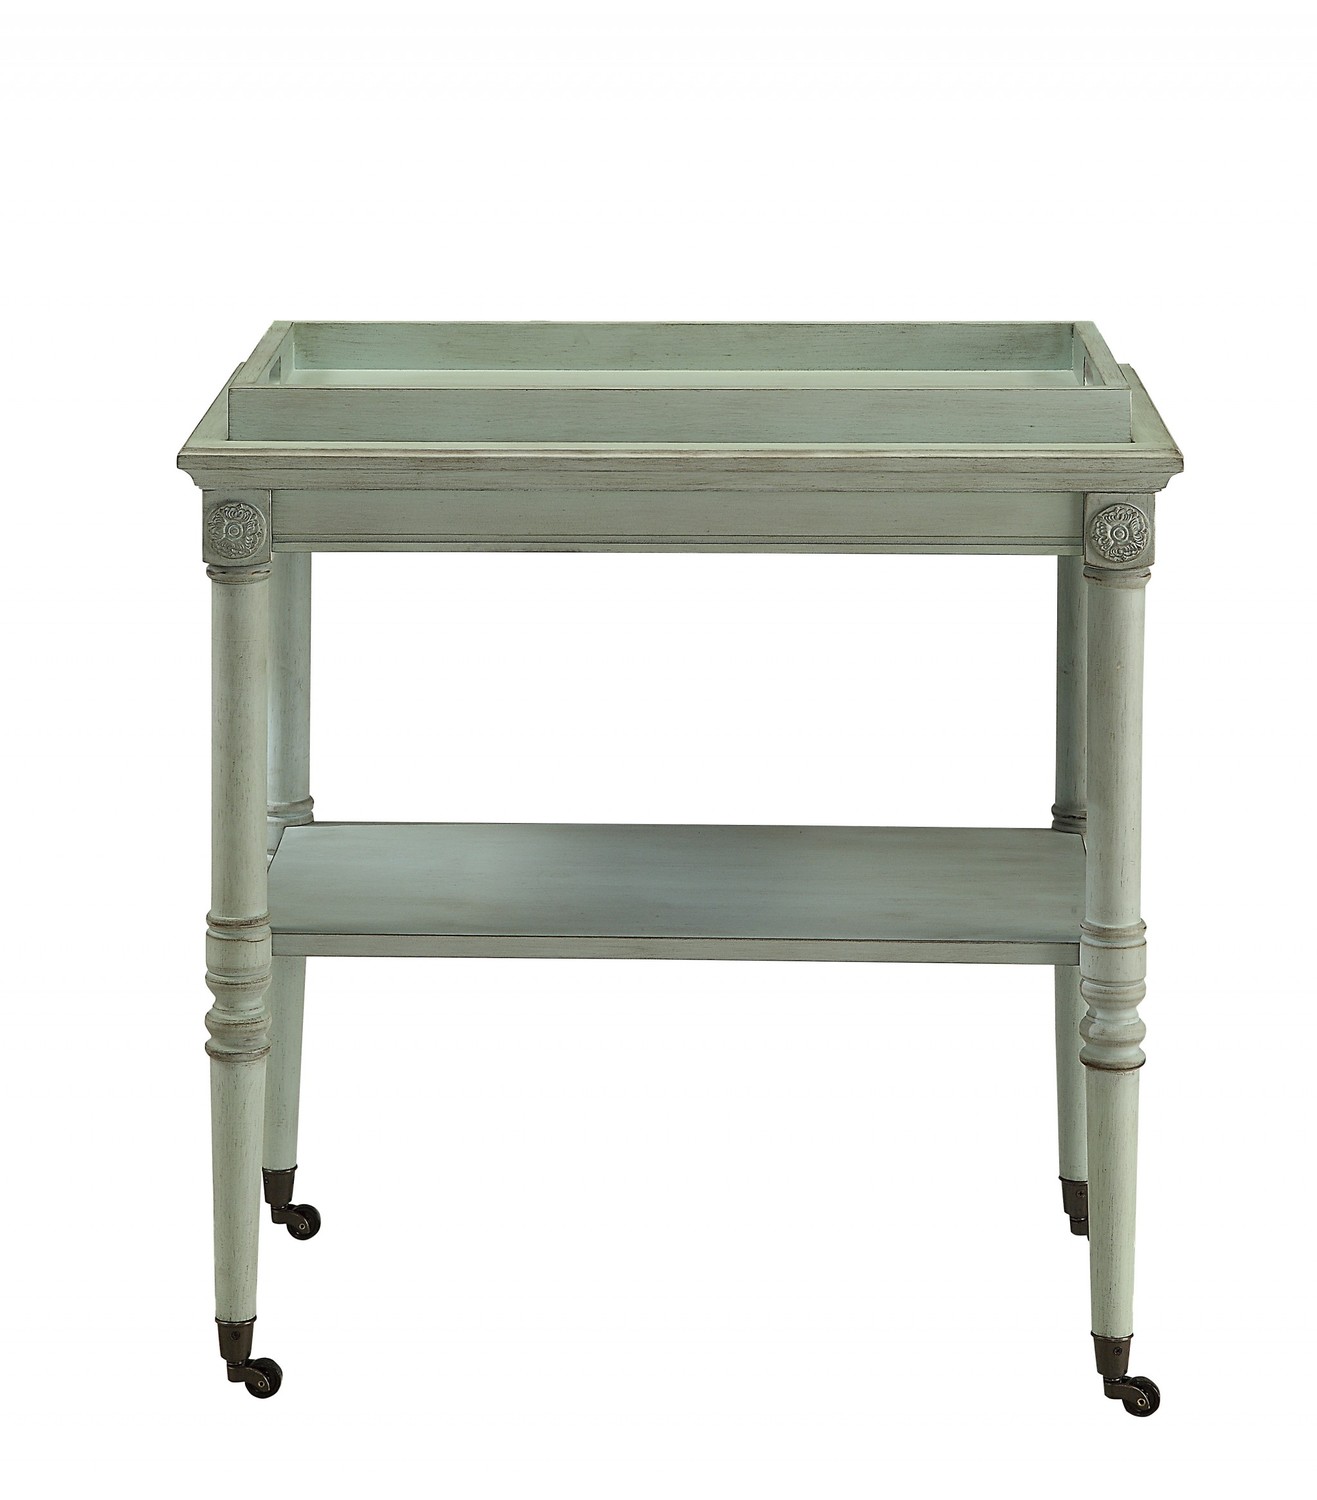 30" X 18" X 32" Antique Green Mdf Tray Table